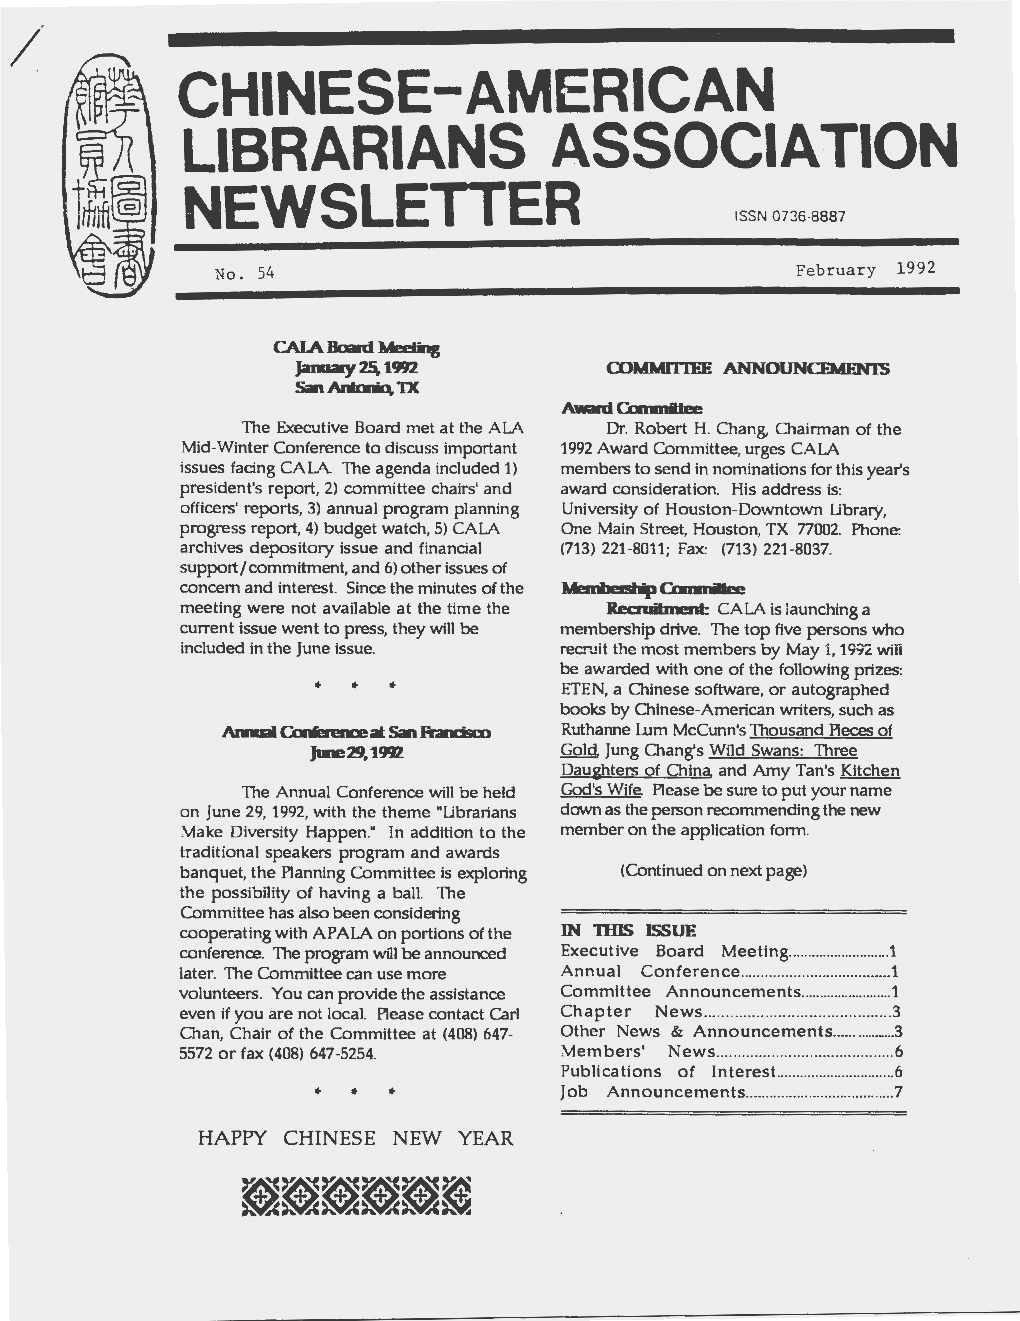 Chinese-American Librarians Association Newsletter